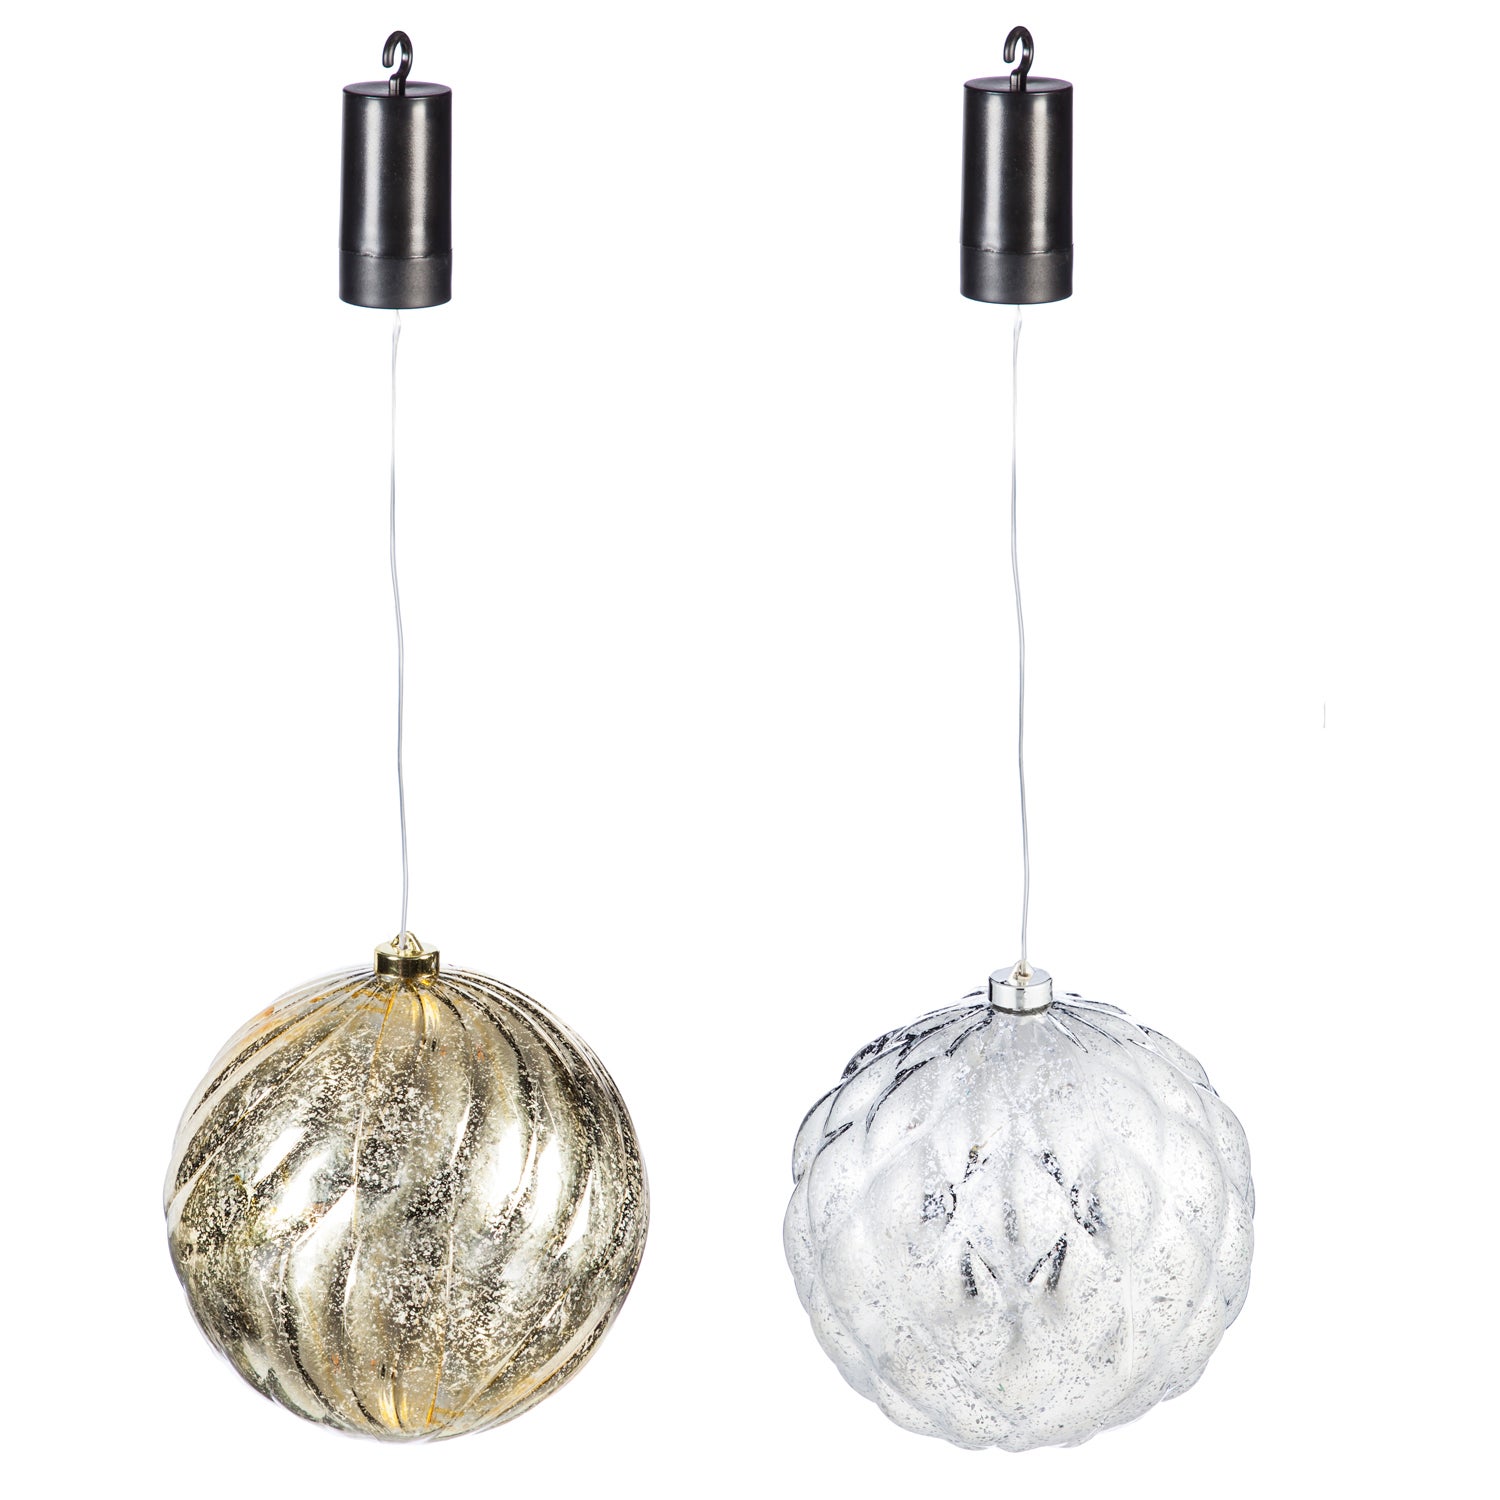 Gold and Silver 8" Shatterproof Outdoor-Safe Battery Operated LED Round Acrylic Ornaments, Set of 2